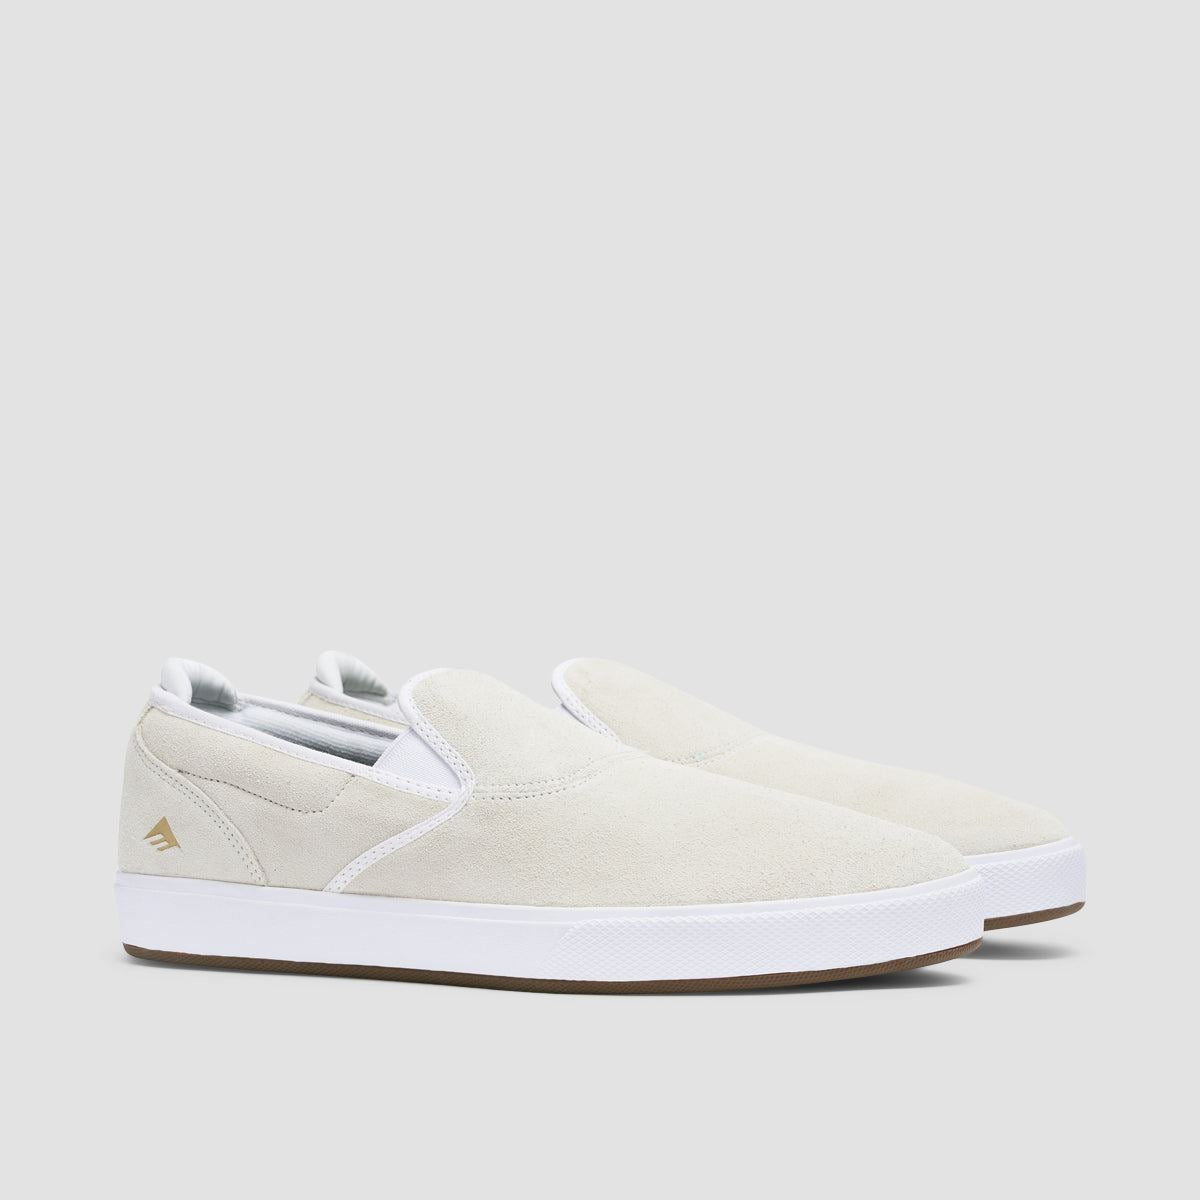 Emerica Wino G6 Cup Slip On Shoes White